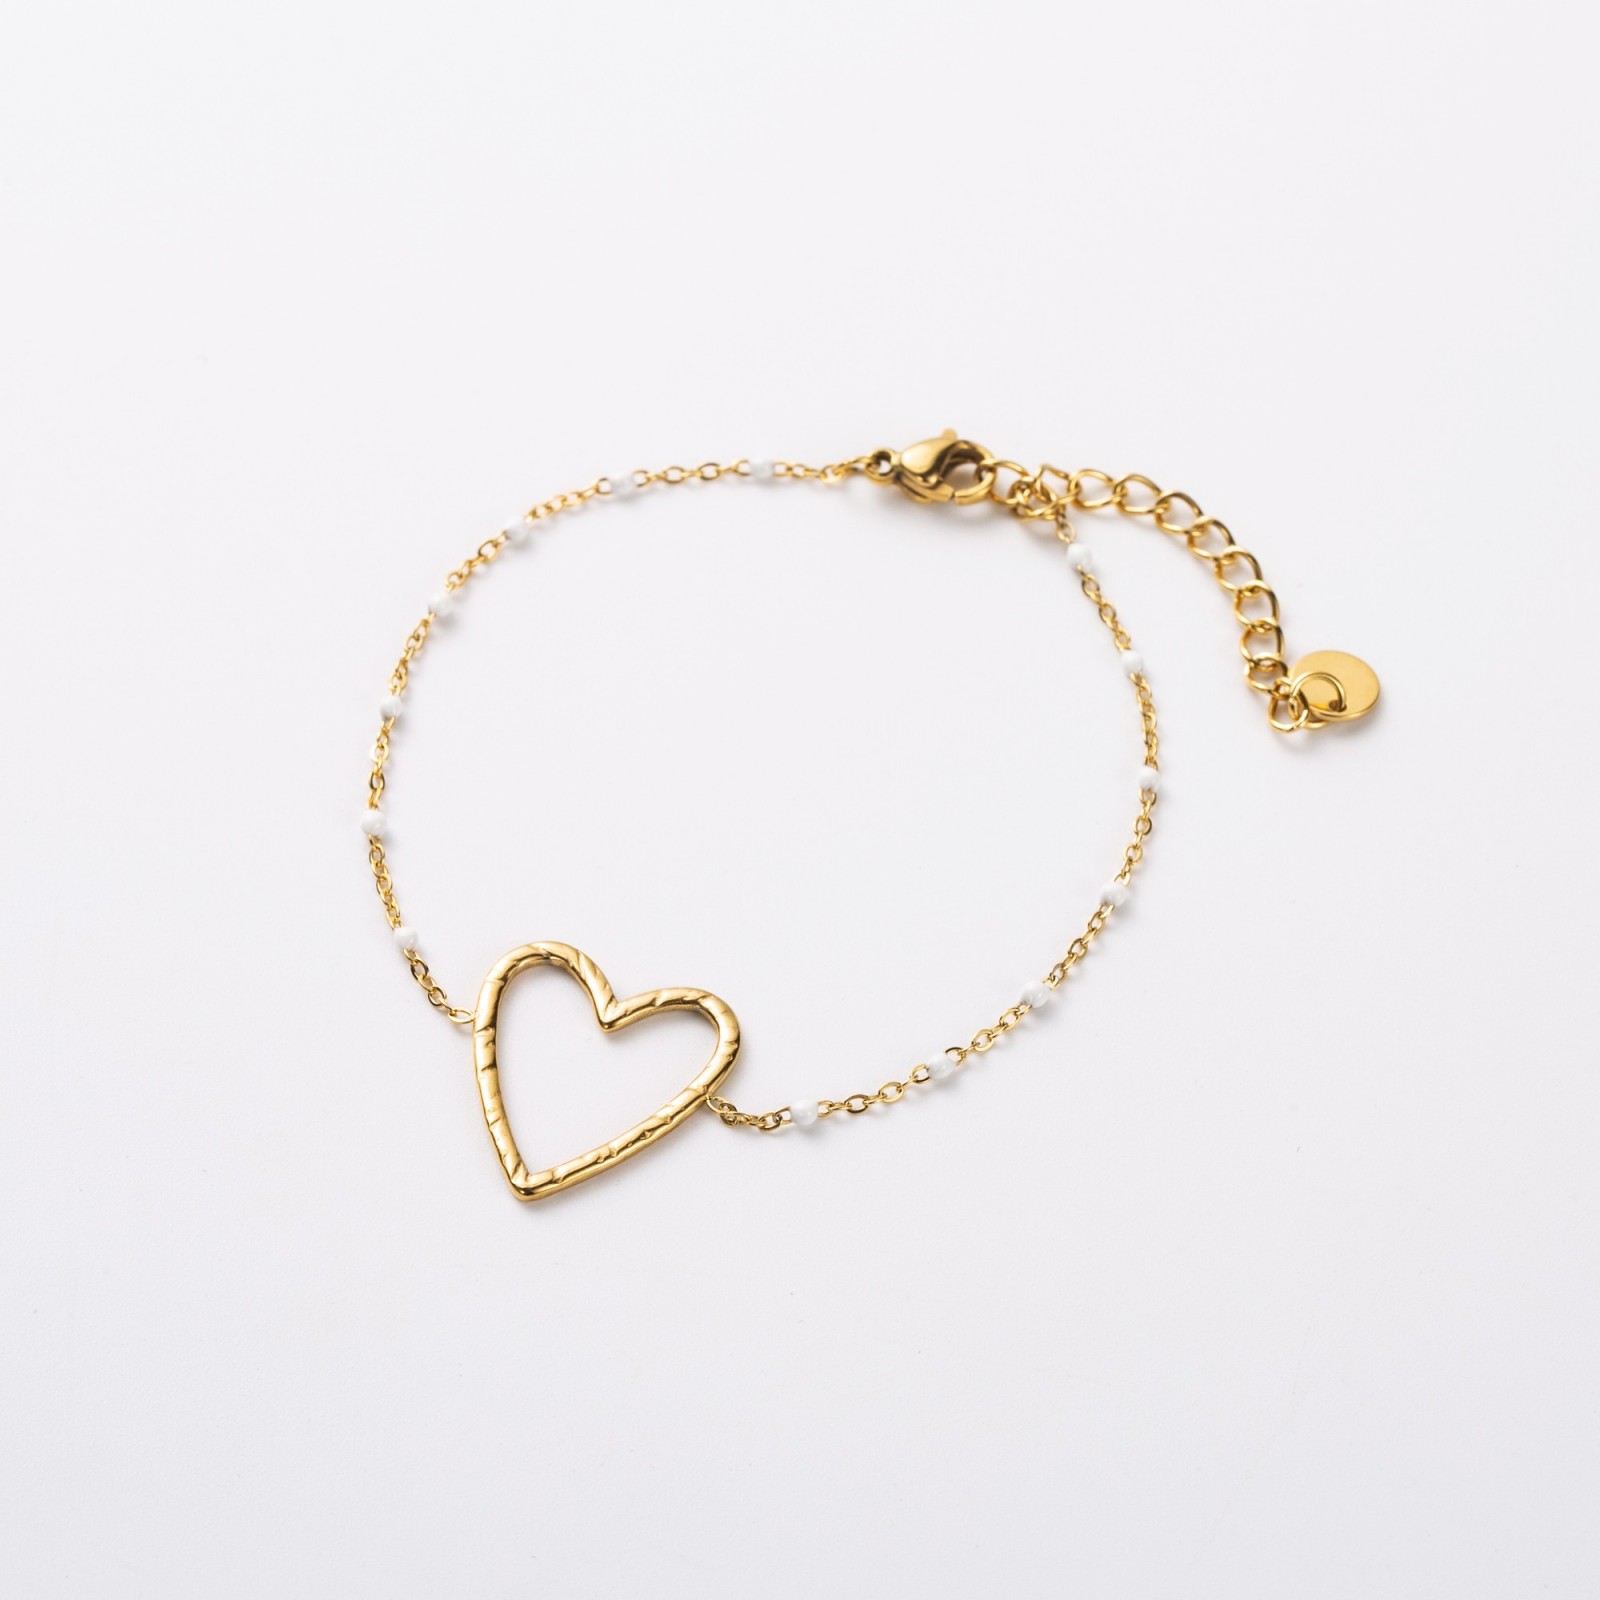 Scratched Heart Bracelet with Pearls 